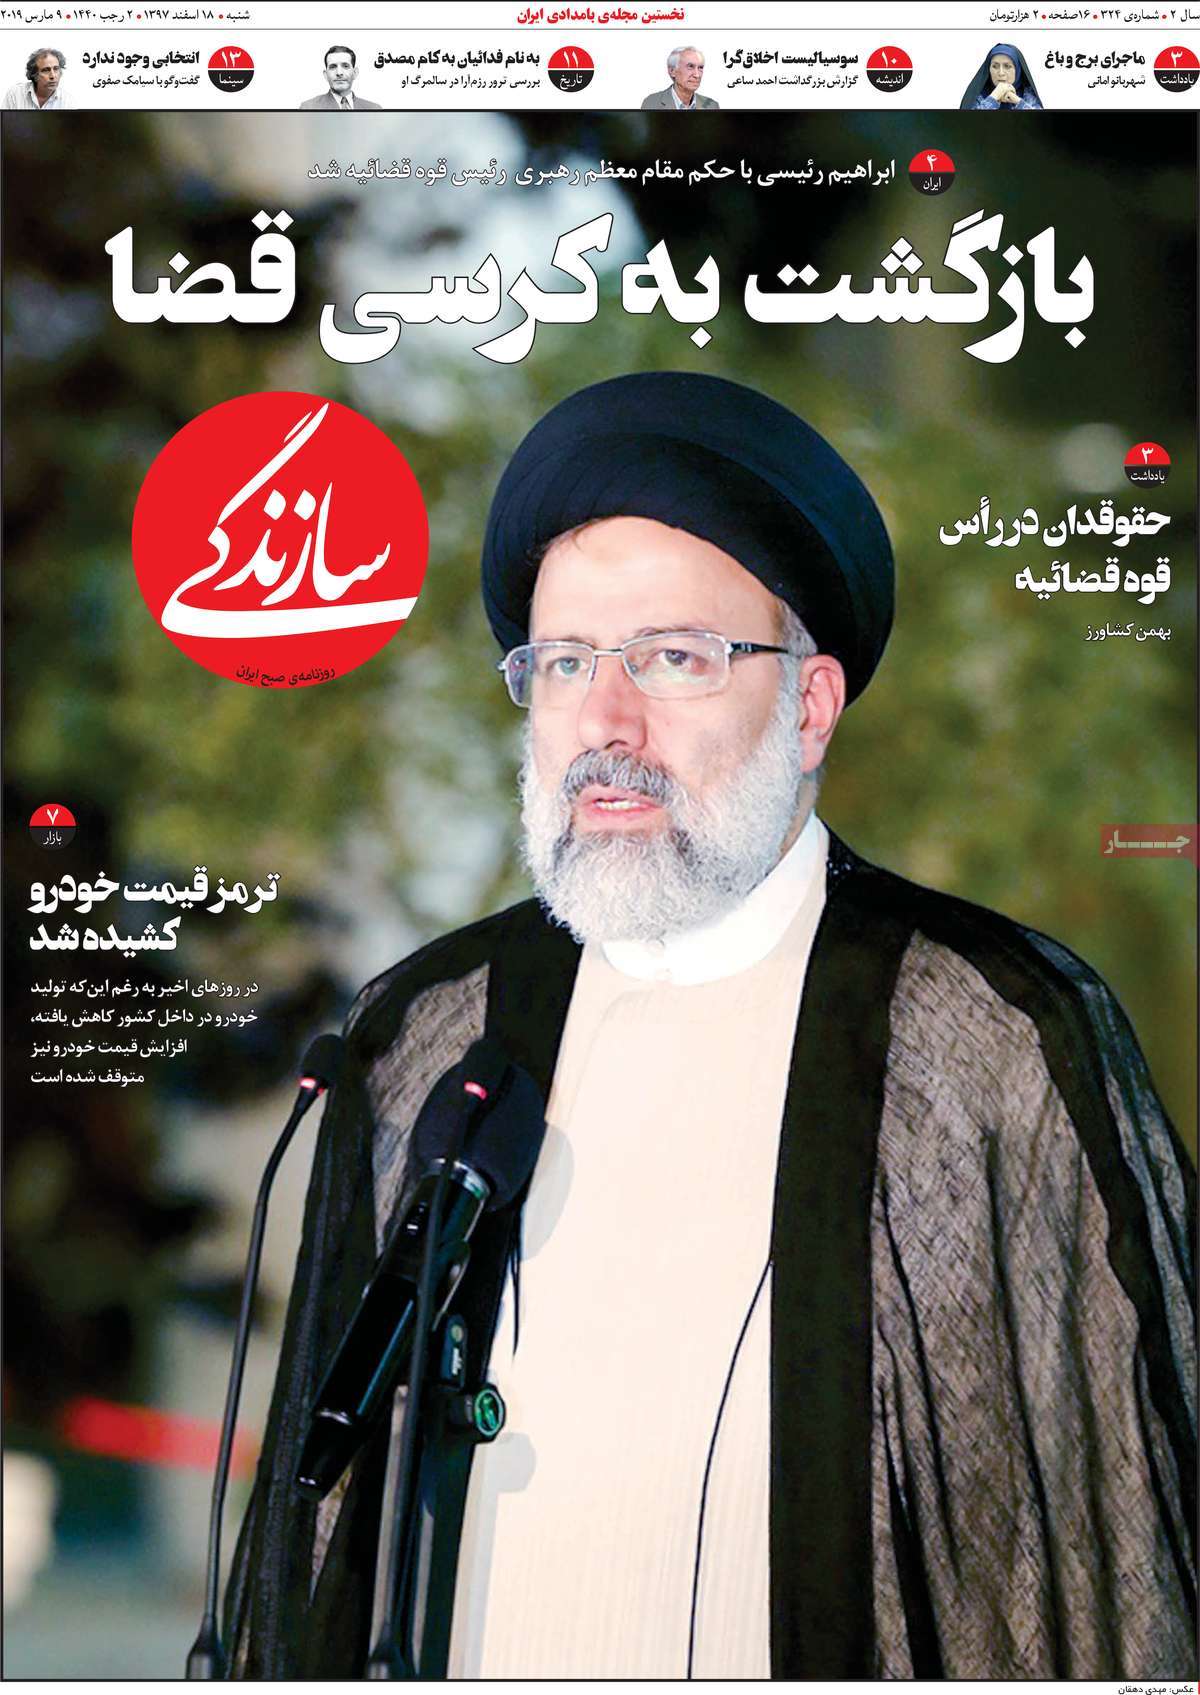 A Look at Iranian Newspaper Front Pages on March 9